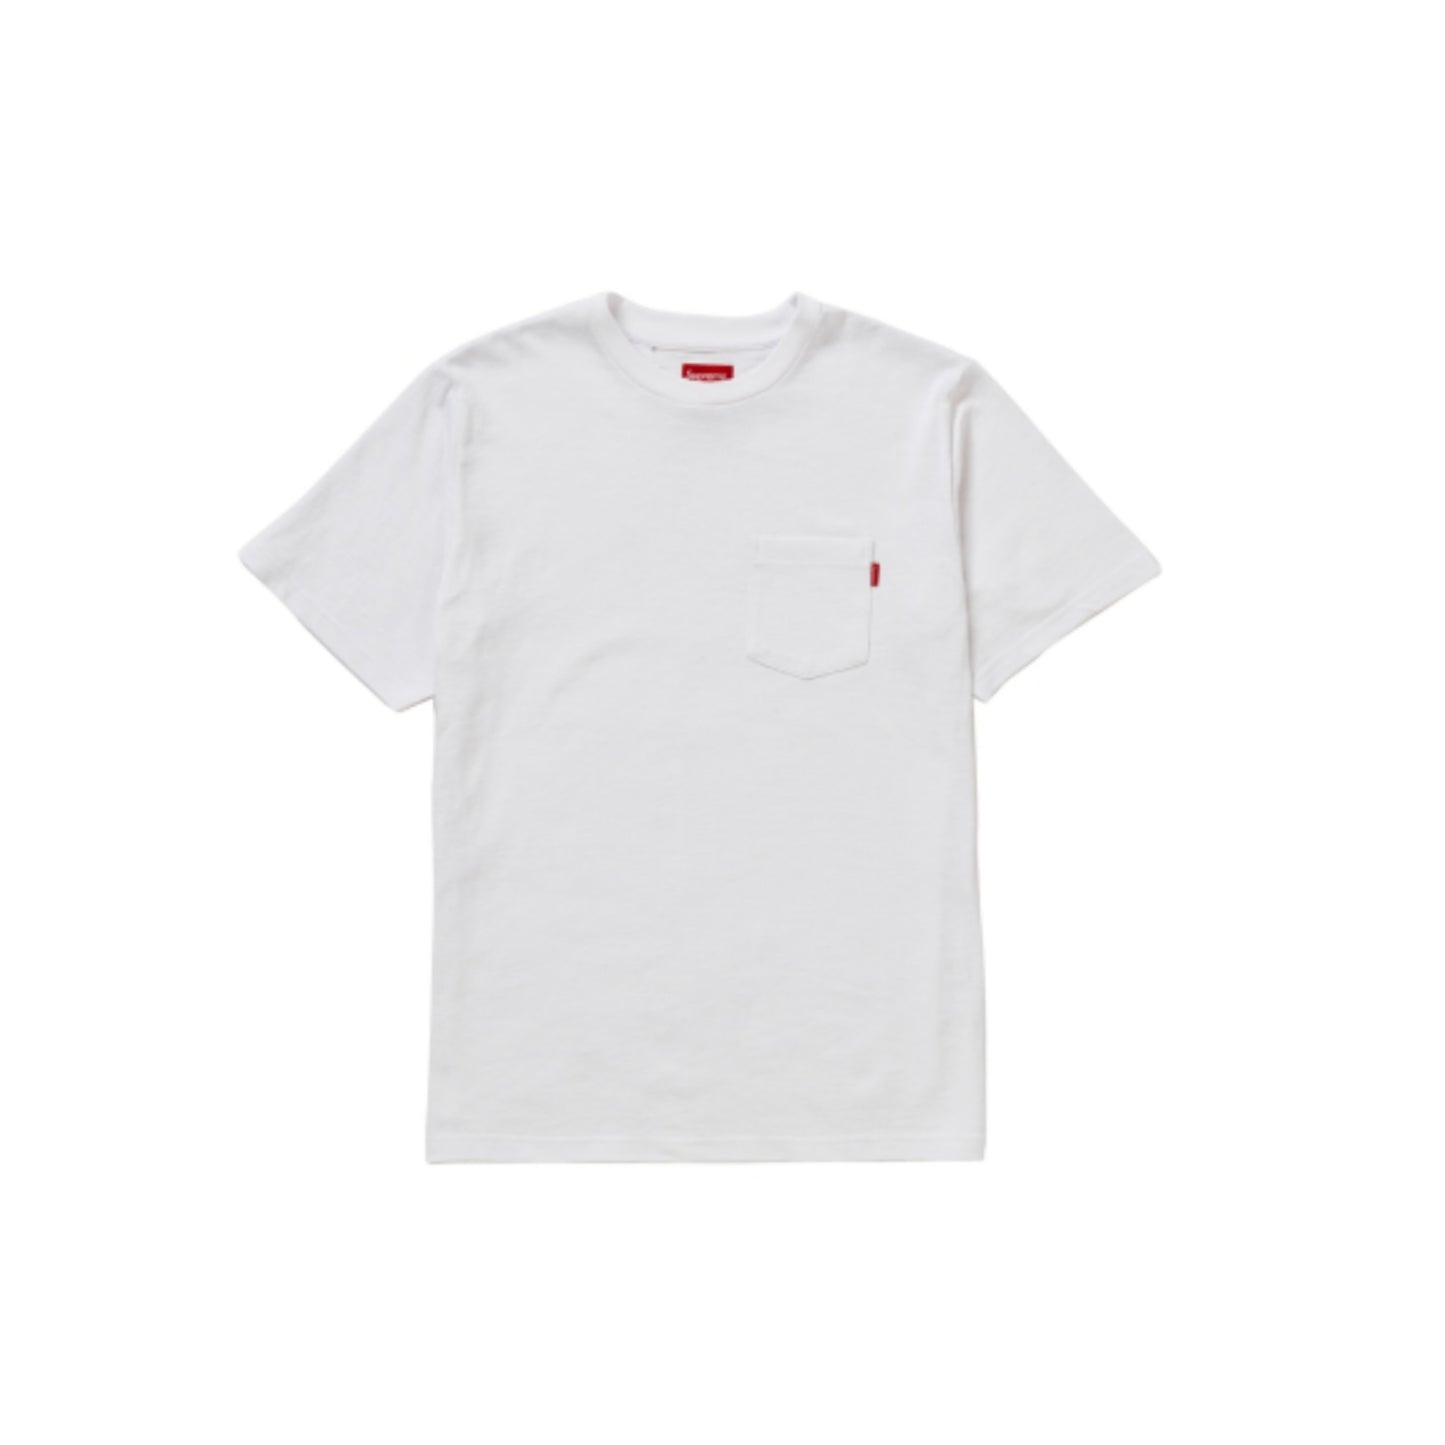 Pocket Tee SS20 White by Supreme